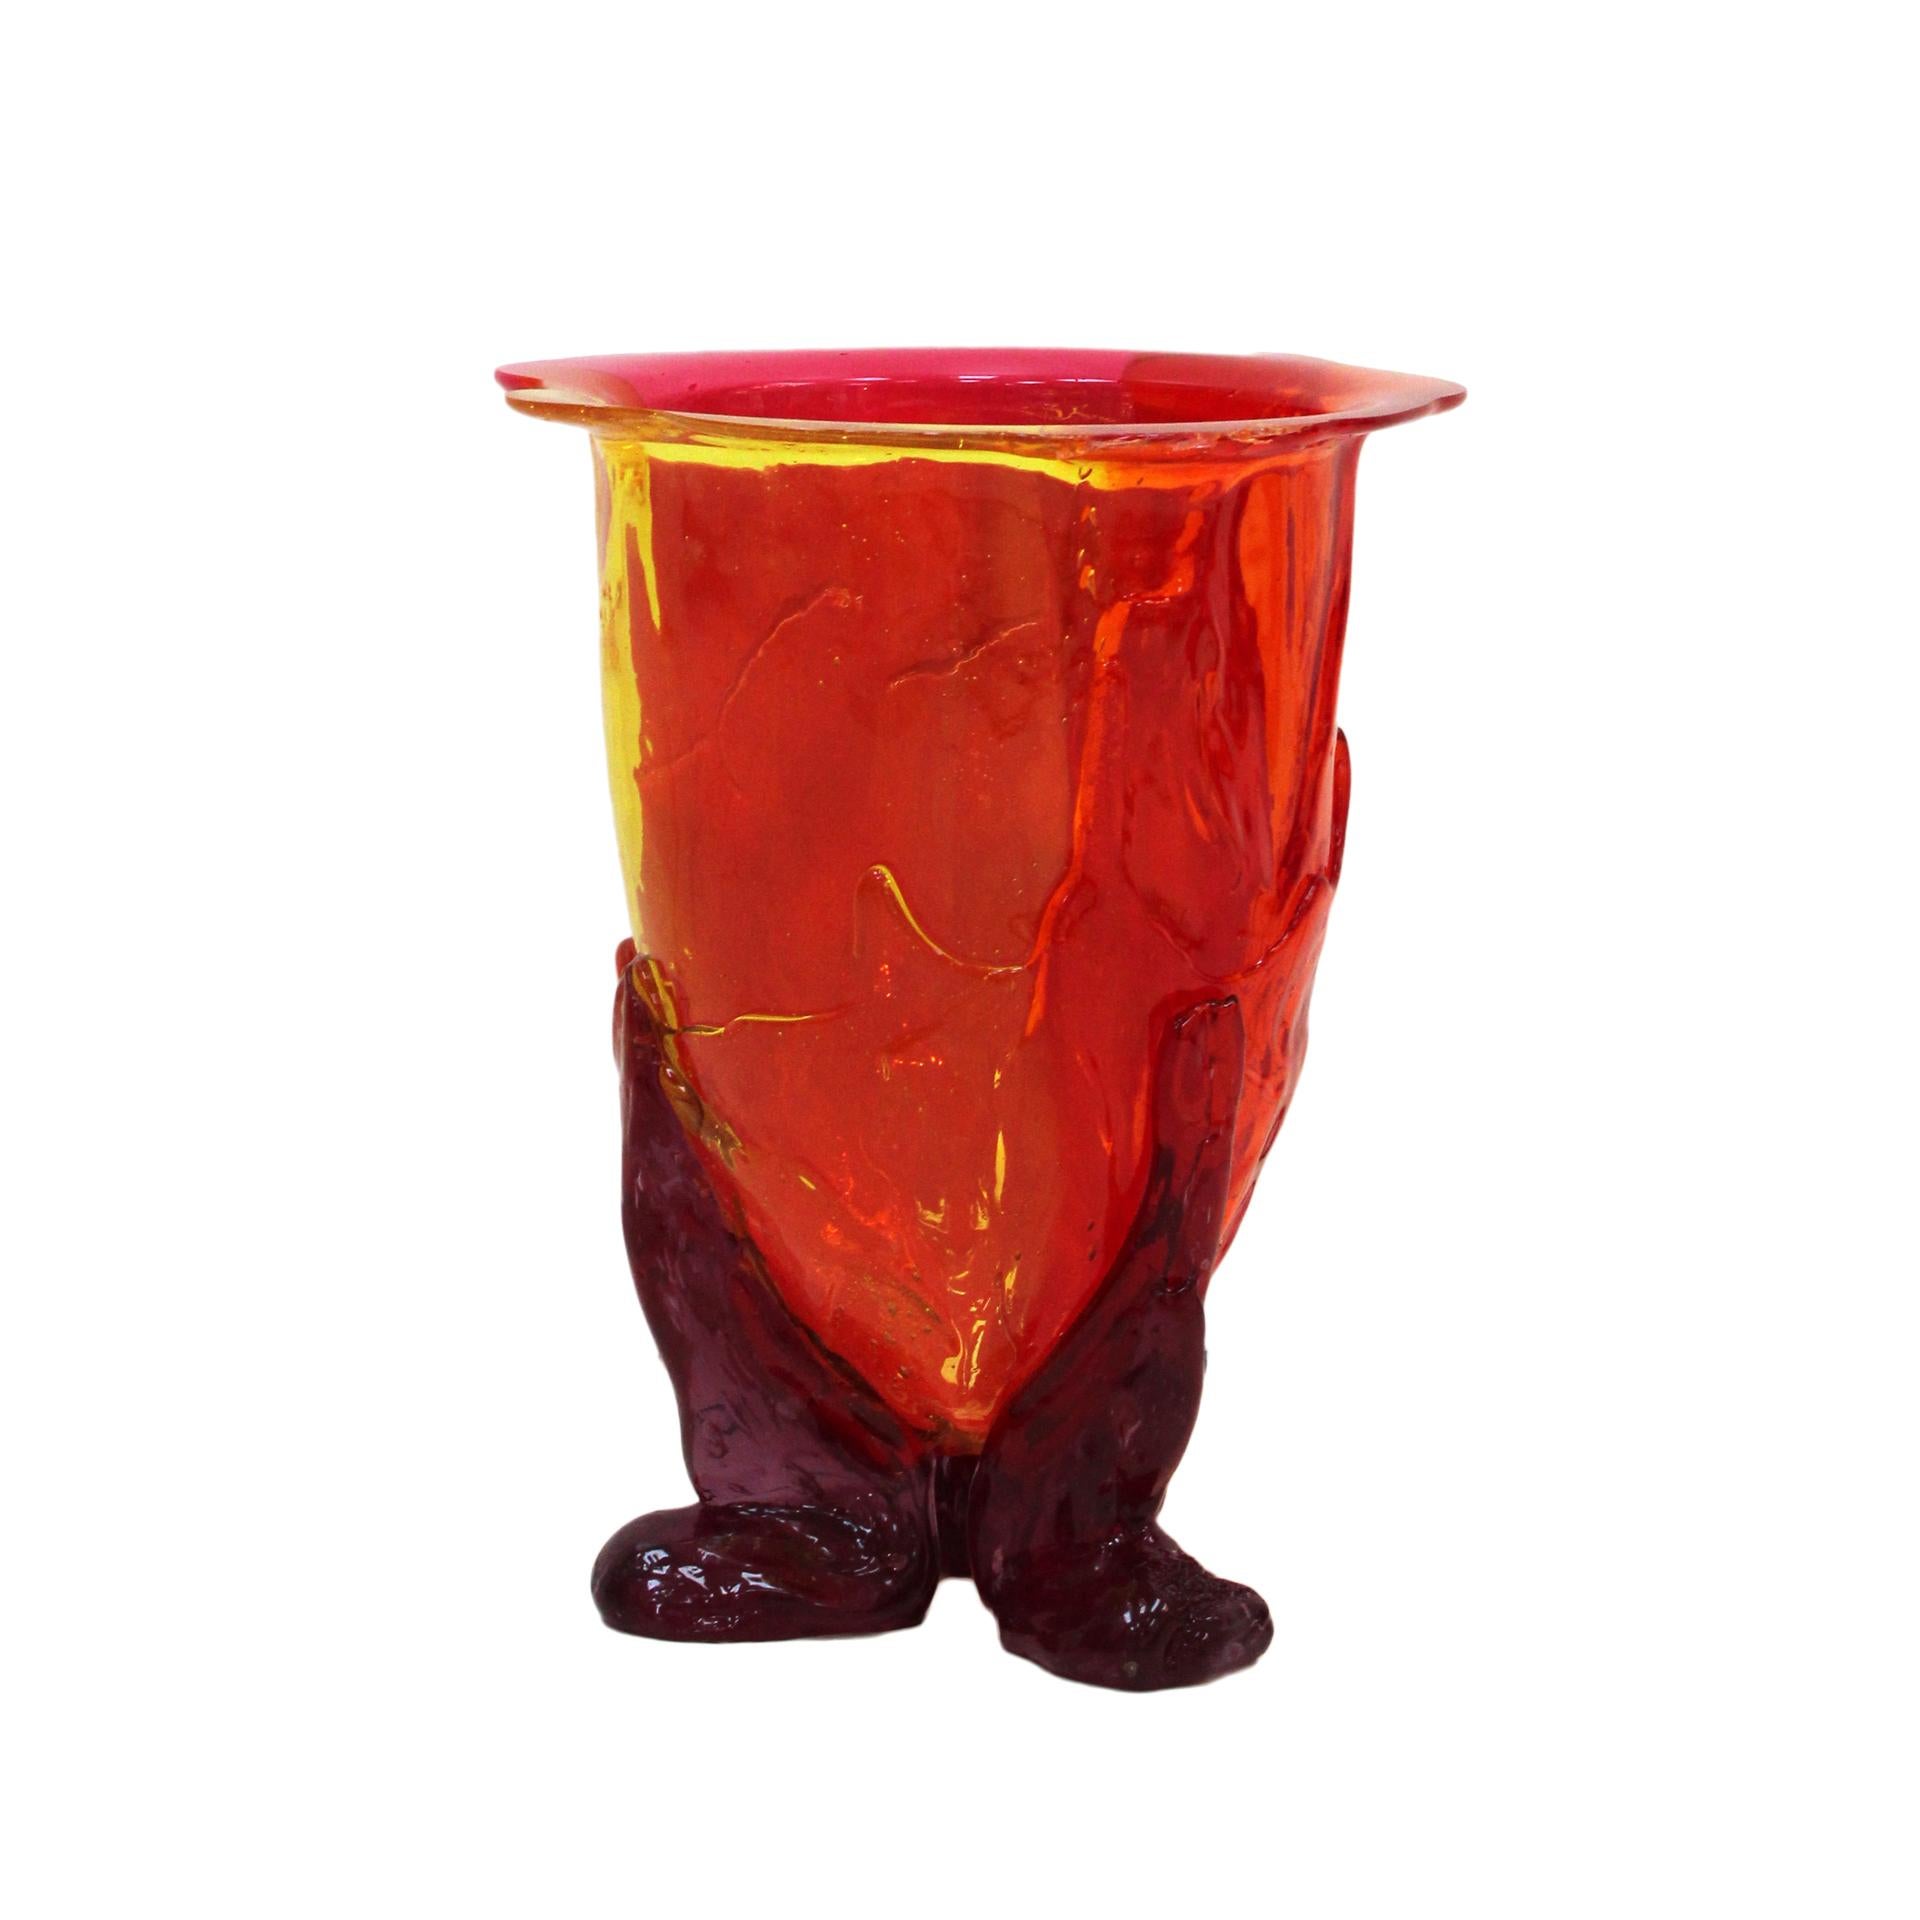 Contemporary vase designed by Gaetano Pesce in 1995 for Fish design. Handmade in yellow, orange and matte purple resin.